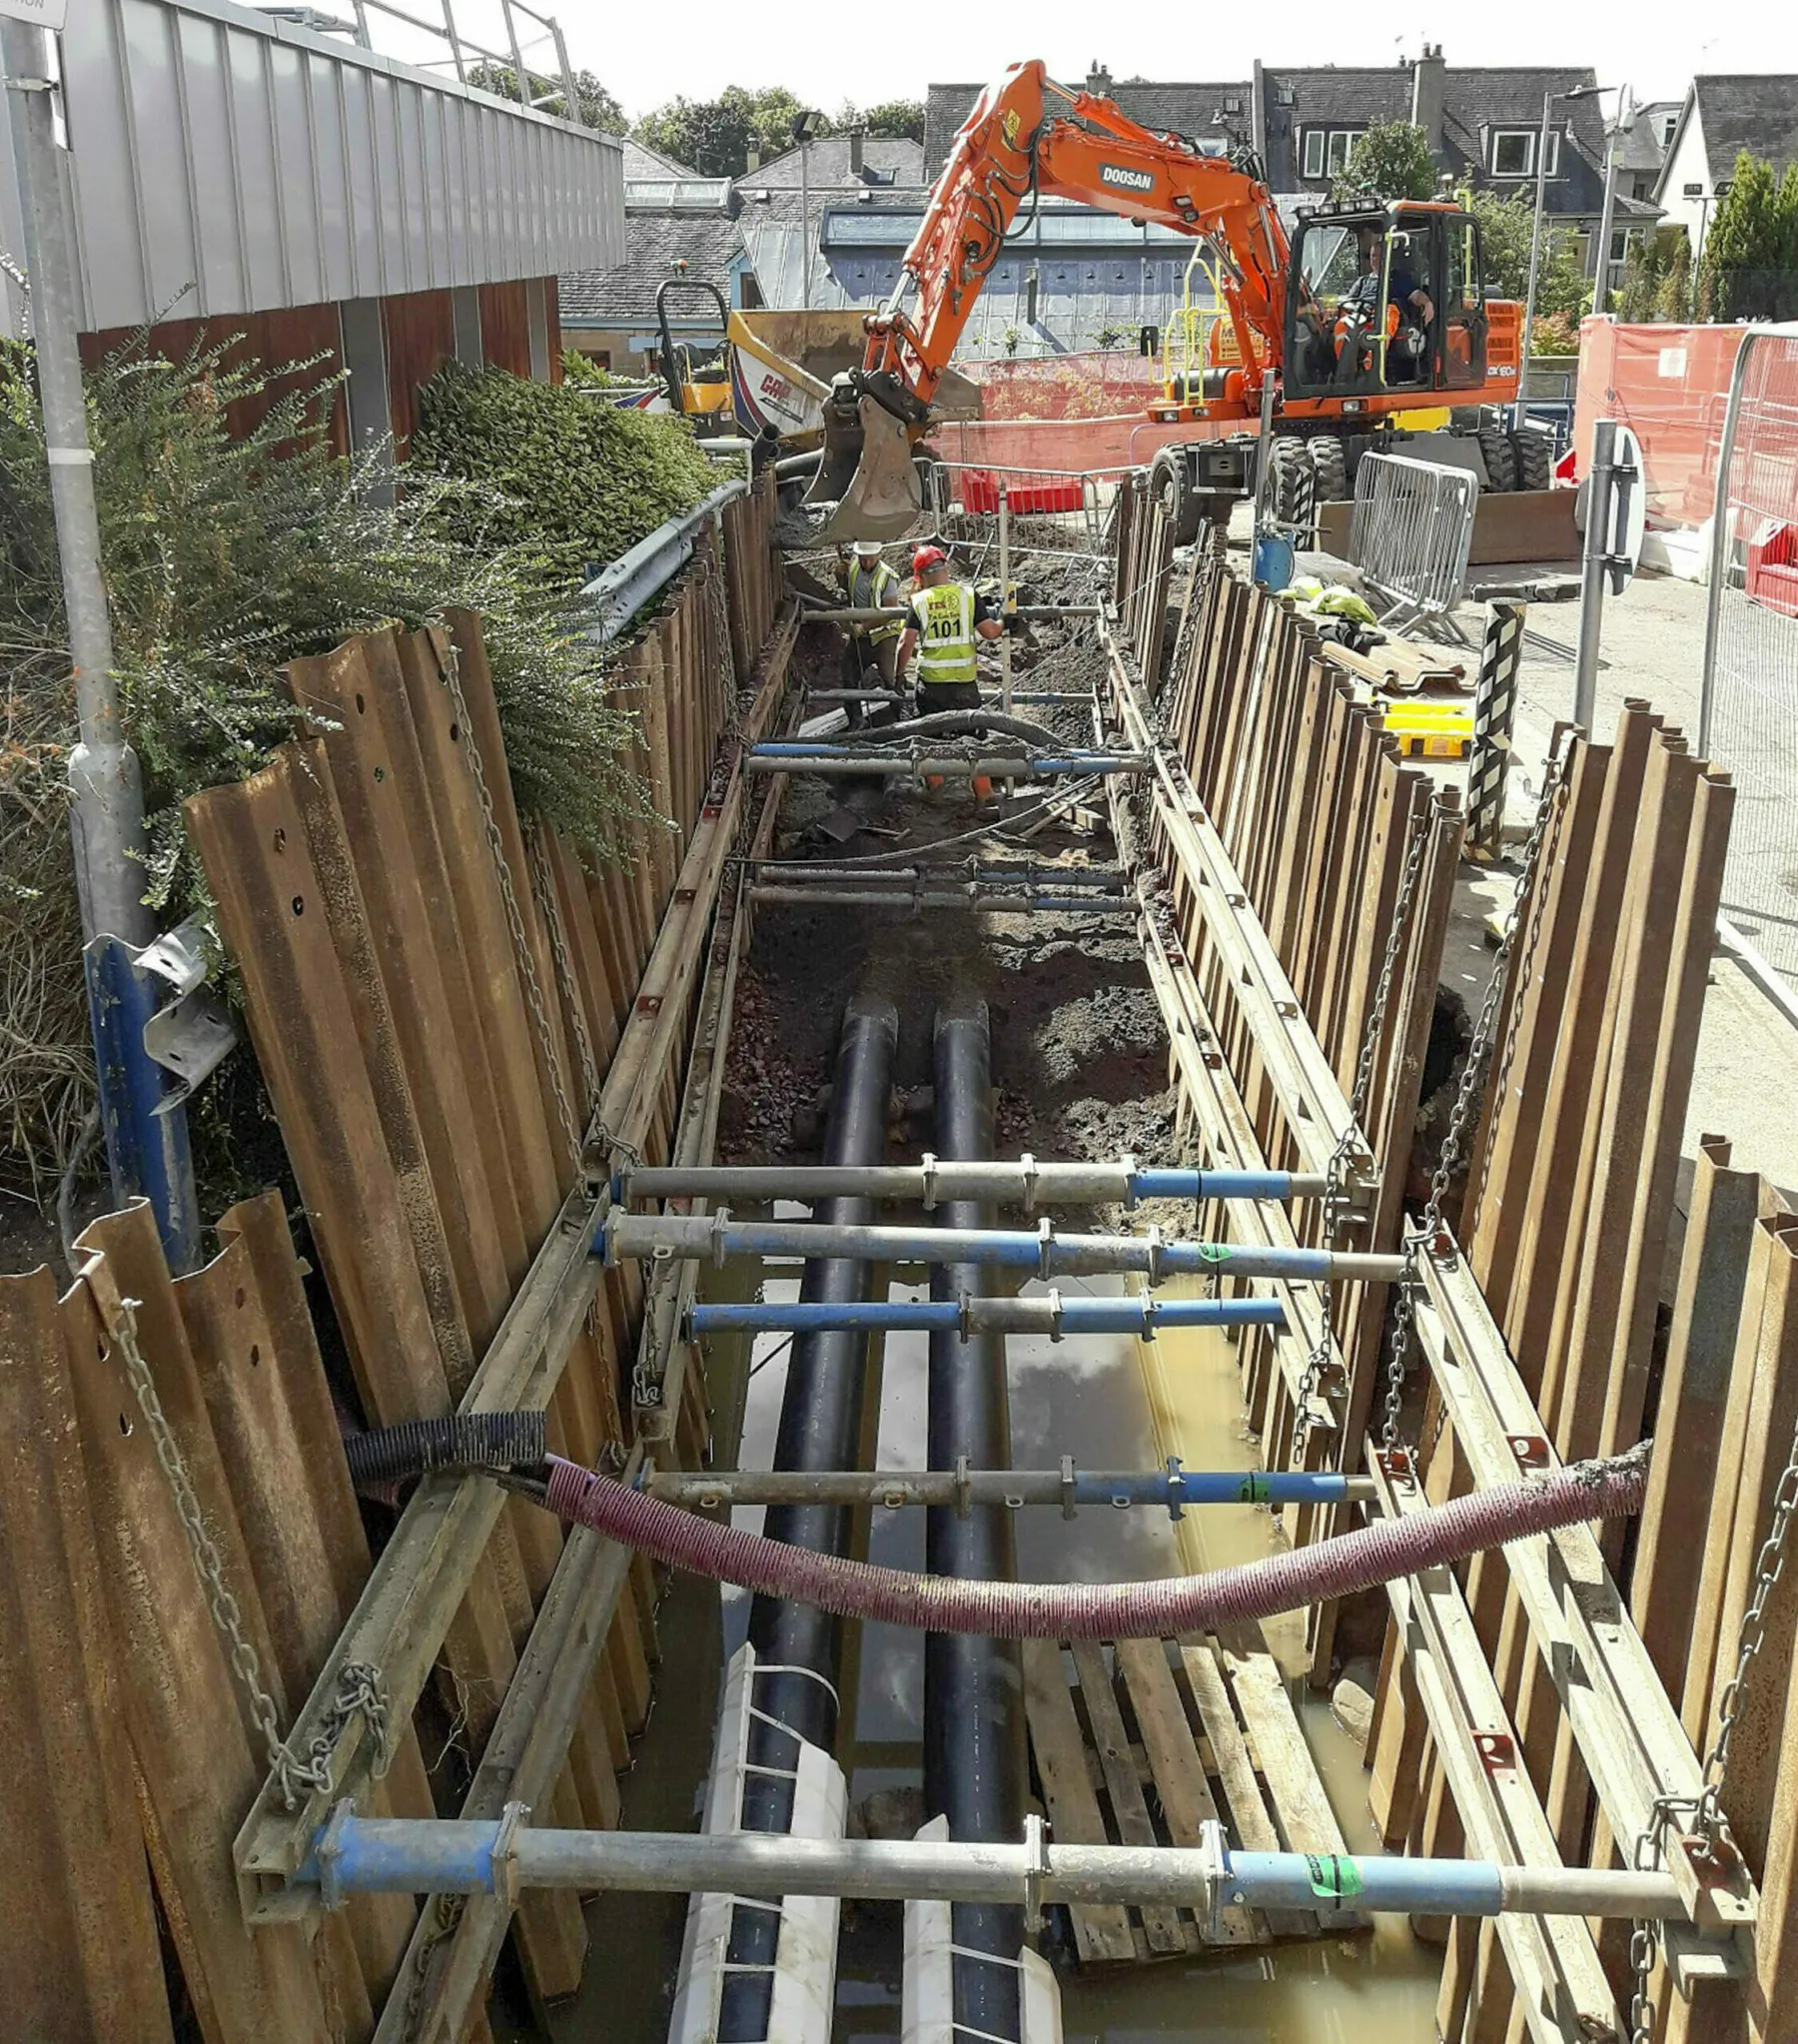 Energy Infrastructure upgrades at the Western General Hospital Edinburgh. A deep trench with reinforced edges. Inside various sections of piping are being installed. A digger is in the background.